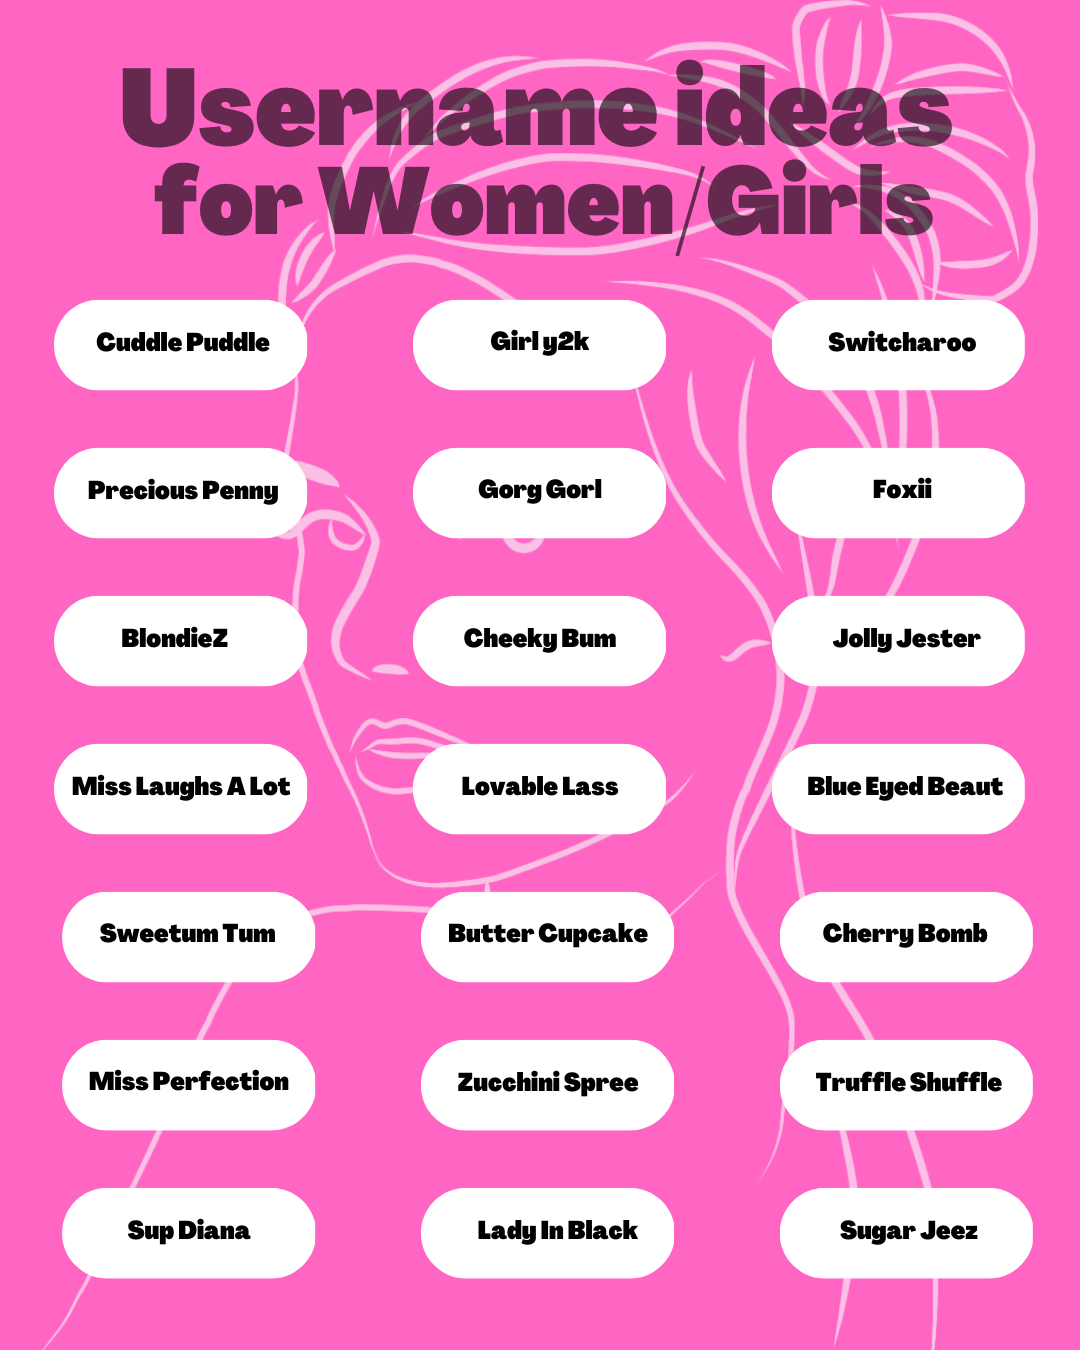 Remote.tools shares a list of username ideas for girl's social media profiles.